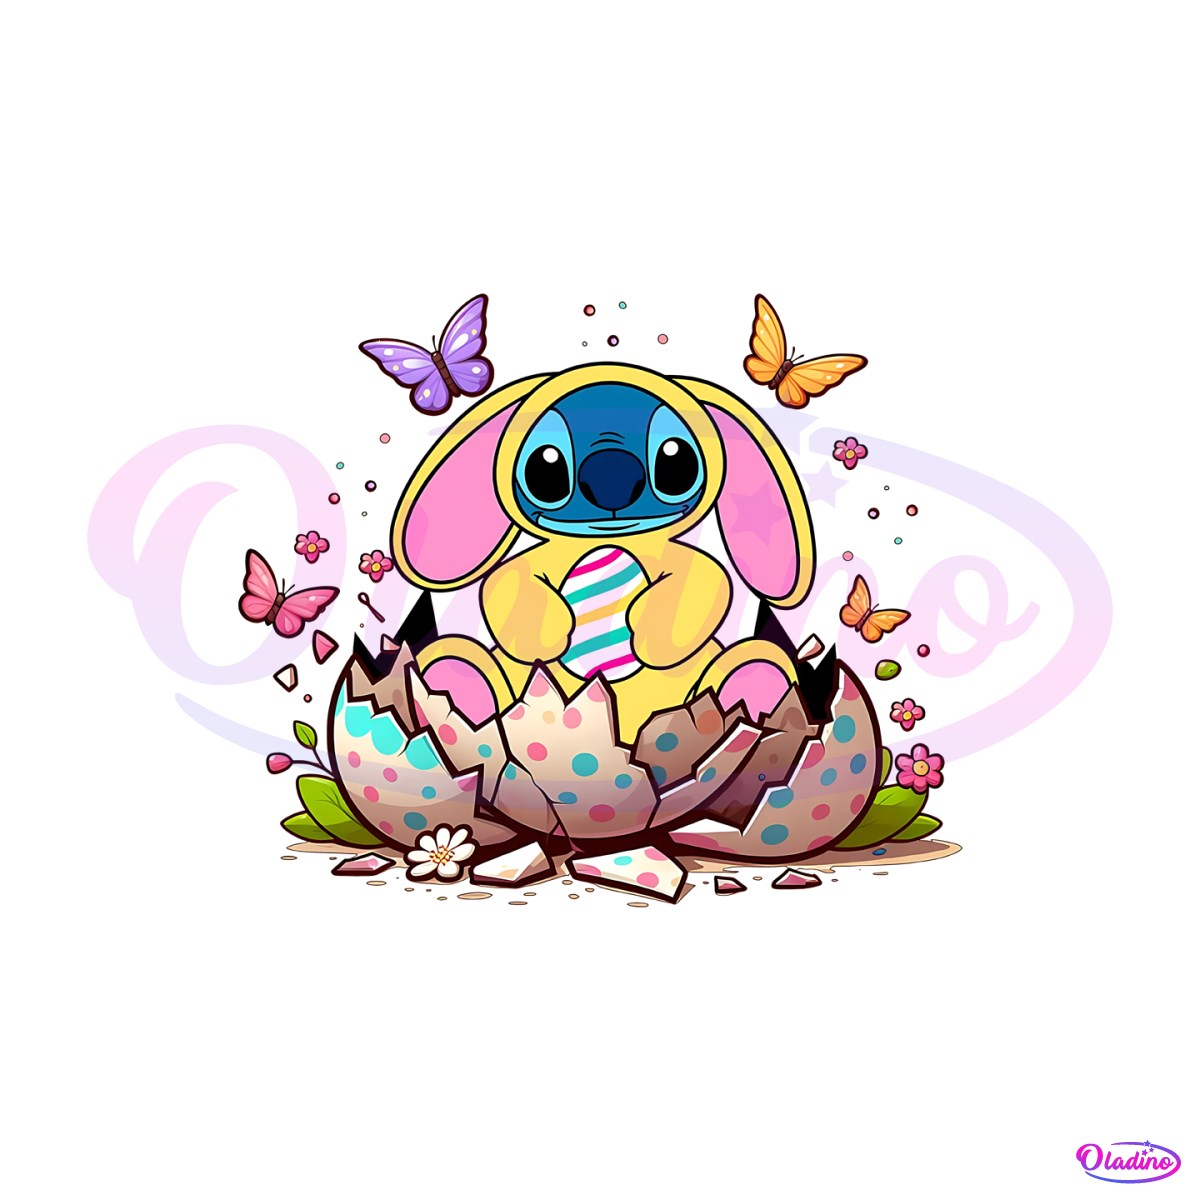 stitch-easter-eggs-cartoon-png